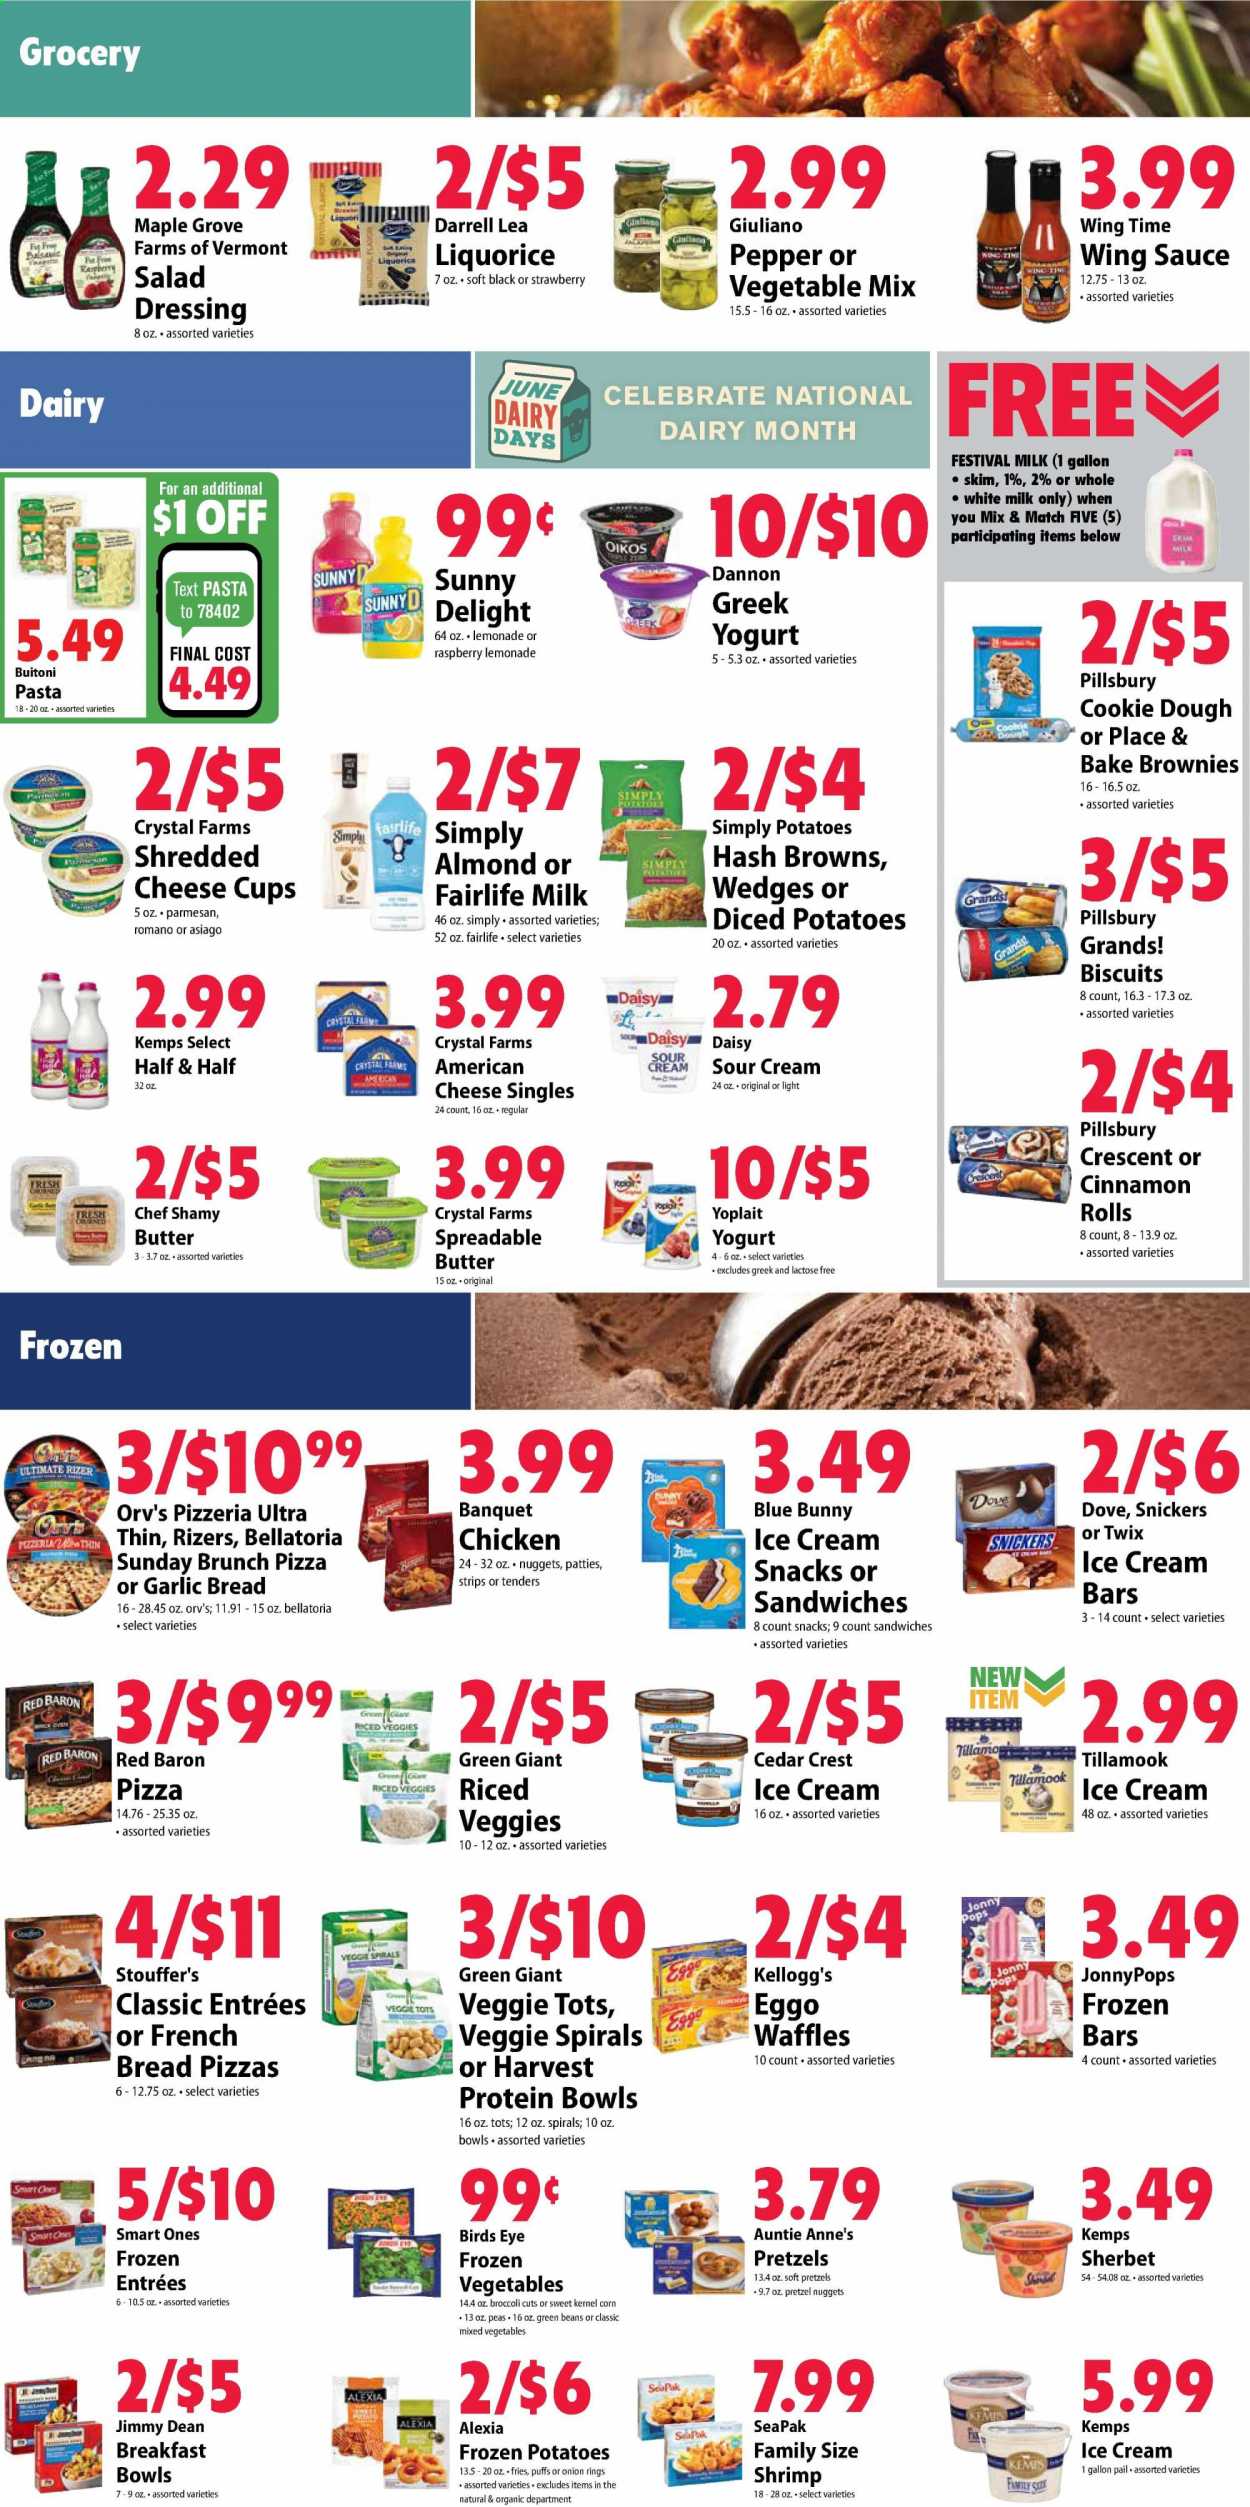 thumbnail - Festival Foods Flyer - 06/09/2021 - 06/15/2021 - Sales products - bread, pretzels, french bread, puffs, brownies, waffles, beans, broccoli, corn, green beans, potatoes, peas, salad, shrimps, pizza, onion rings, sandwich, nuggets, pasta, sauce, Pillsbury, Bird's Eye, Jimmy Dean, Buitoni, asiago, shredded cheese, cheese cup, parmesan, Kemps, Oikos, Yoplait, Dannon, milk, butter, spreadable butter, sour cream, ice cream, ice cream bars, sherbet, Ola, JonnyPops, Blue Bunny, mixed vegetables, strips, Stouffer's, hash browns, potato fries, Red Baron, Bellatoria, cookie dough, snack, Snickers, Twix, Kellogg's, biscuit, cinnamon, dressing, wing sauce, lemonade, Dove, Crest, Half and half. Page 4.